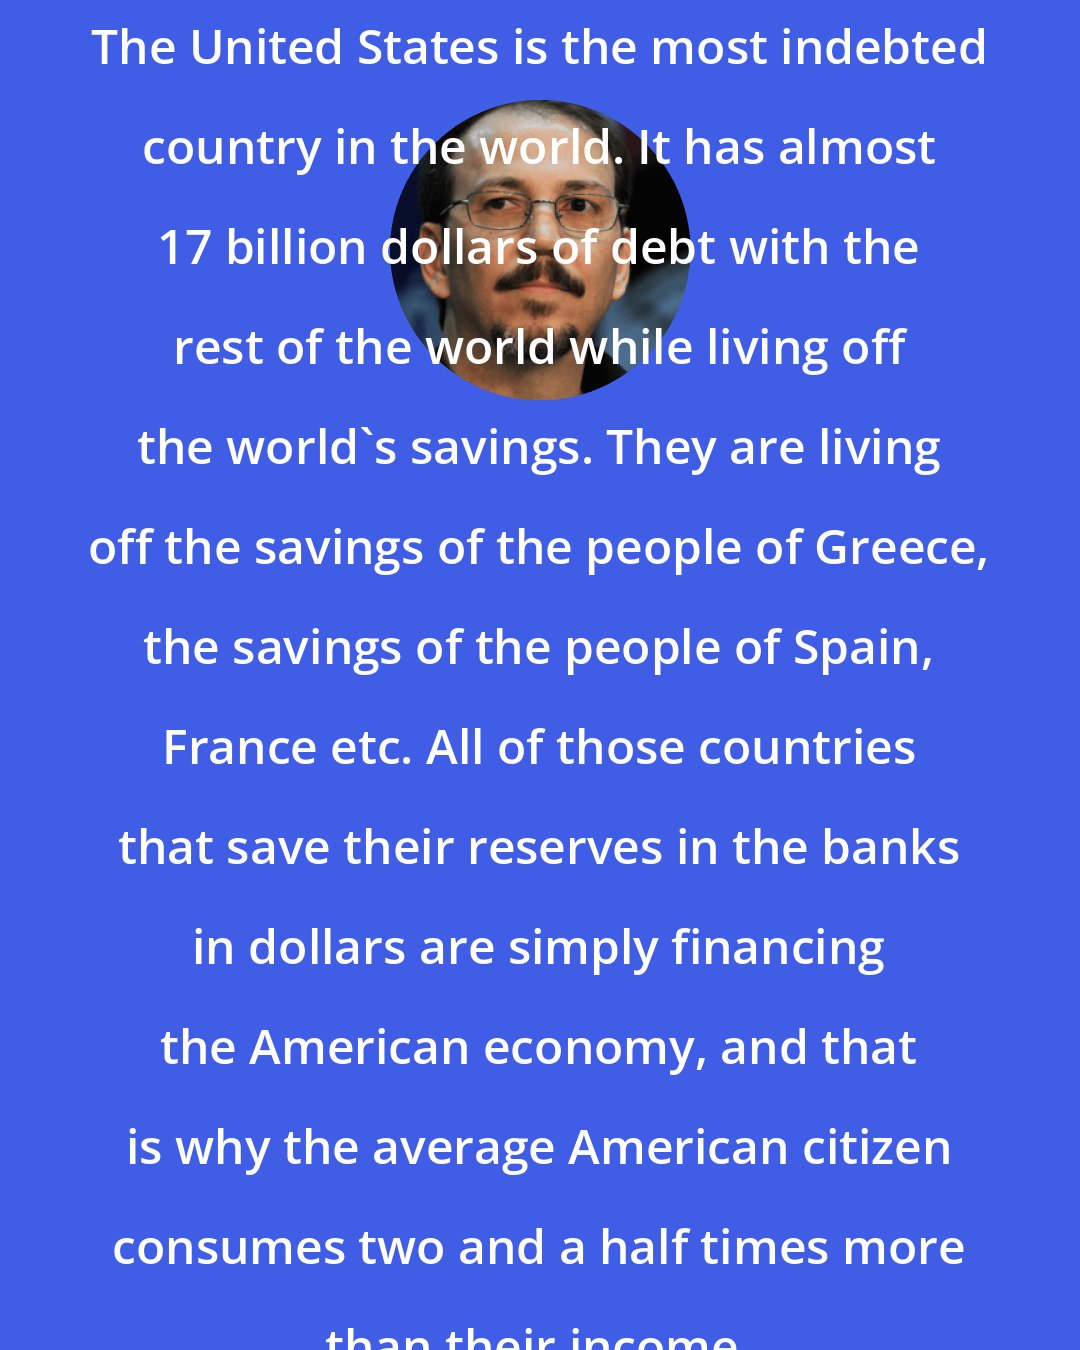 Alejandro Castro Espin: The United States is the most indebted country in the world. It has almost 17 billion dollars of debt with the rest of the world while living off the world's savings. They are living off the savings of the people of Greece, the savings of the people of Spain, France etc. All of those countries that save their reserves in the banks in dollars are simply financing the American economy, and that is why the average American citizen consumes two and a half times more than their income.